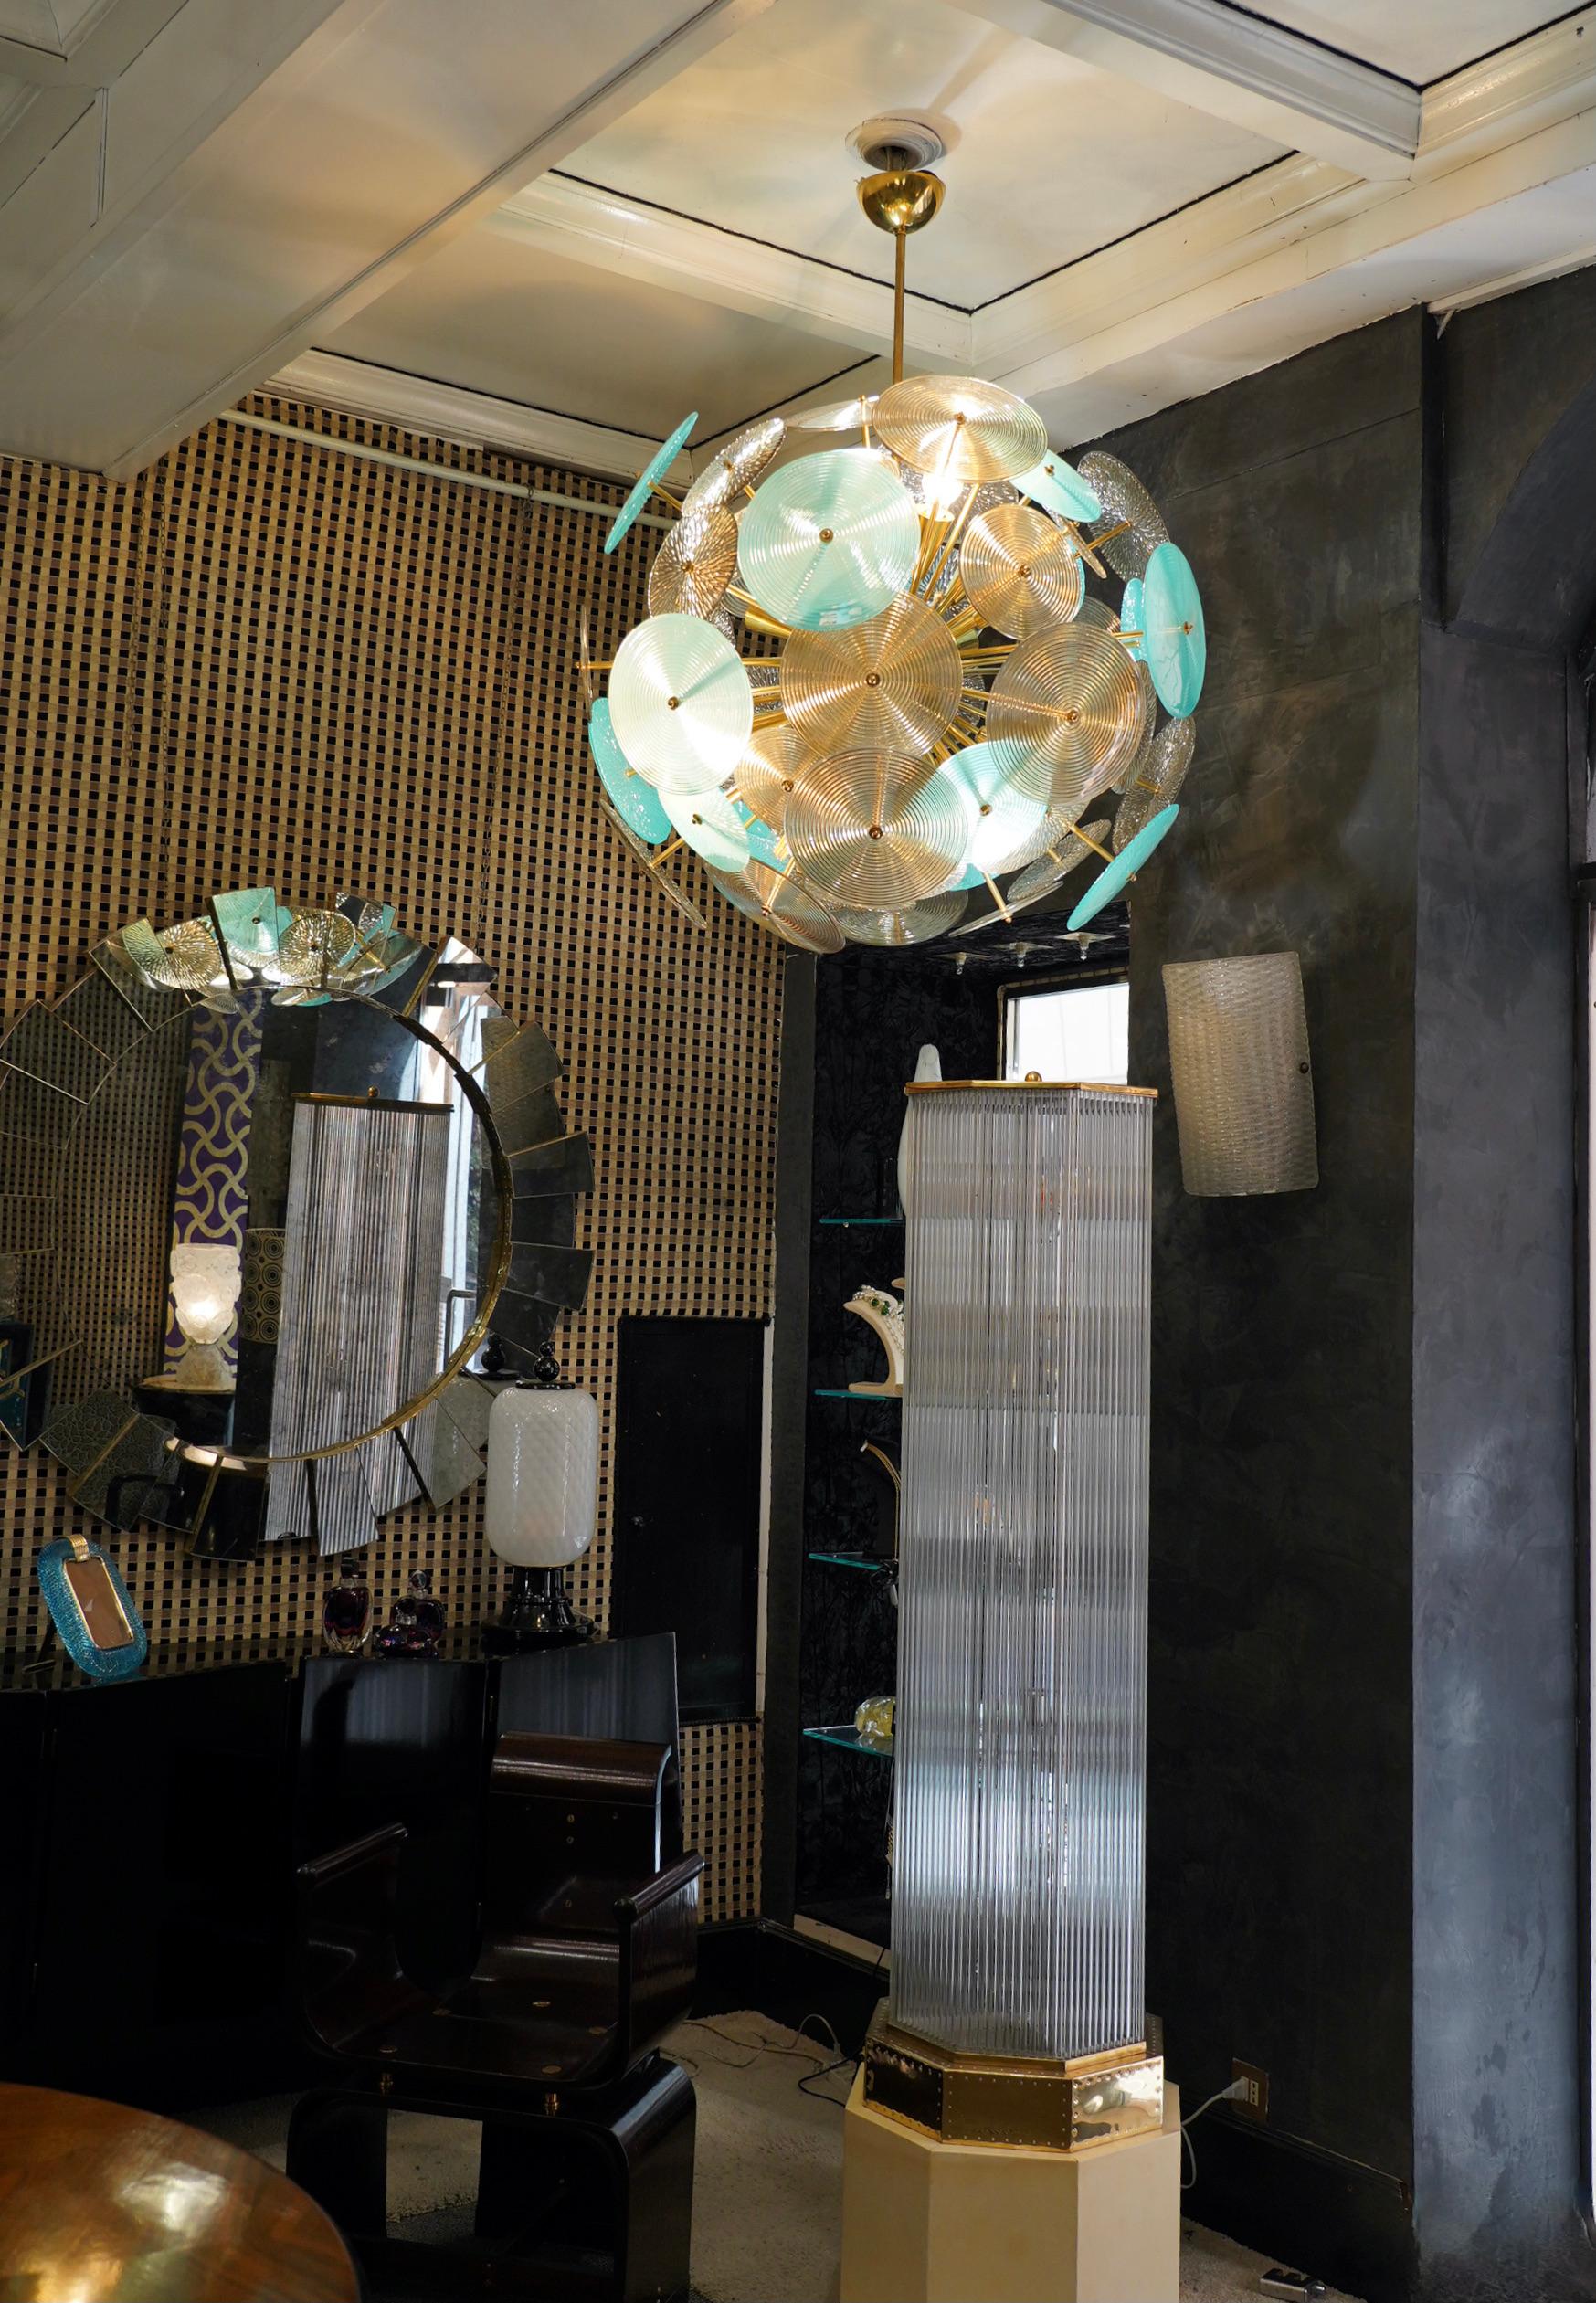 The large turquoise and smoked glass disks make up this Murano chandelier from the 1980. A Classic Sputnik from the middle of the century.

Made of a large central sphere in which brass rods are screwed, glass disks are placed above the brass rods.